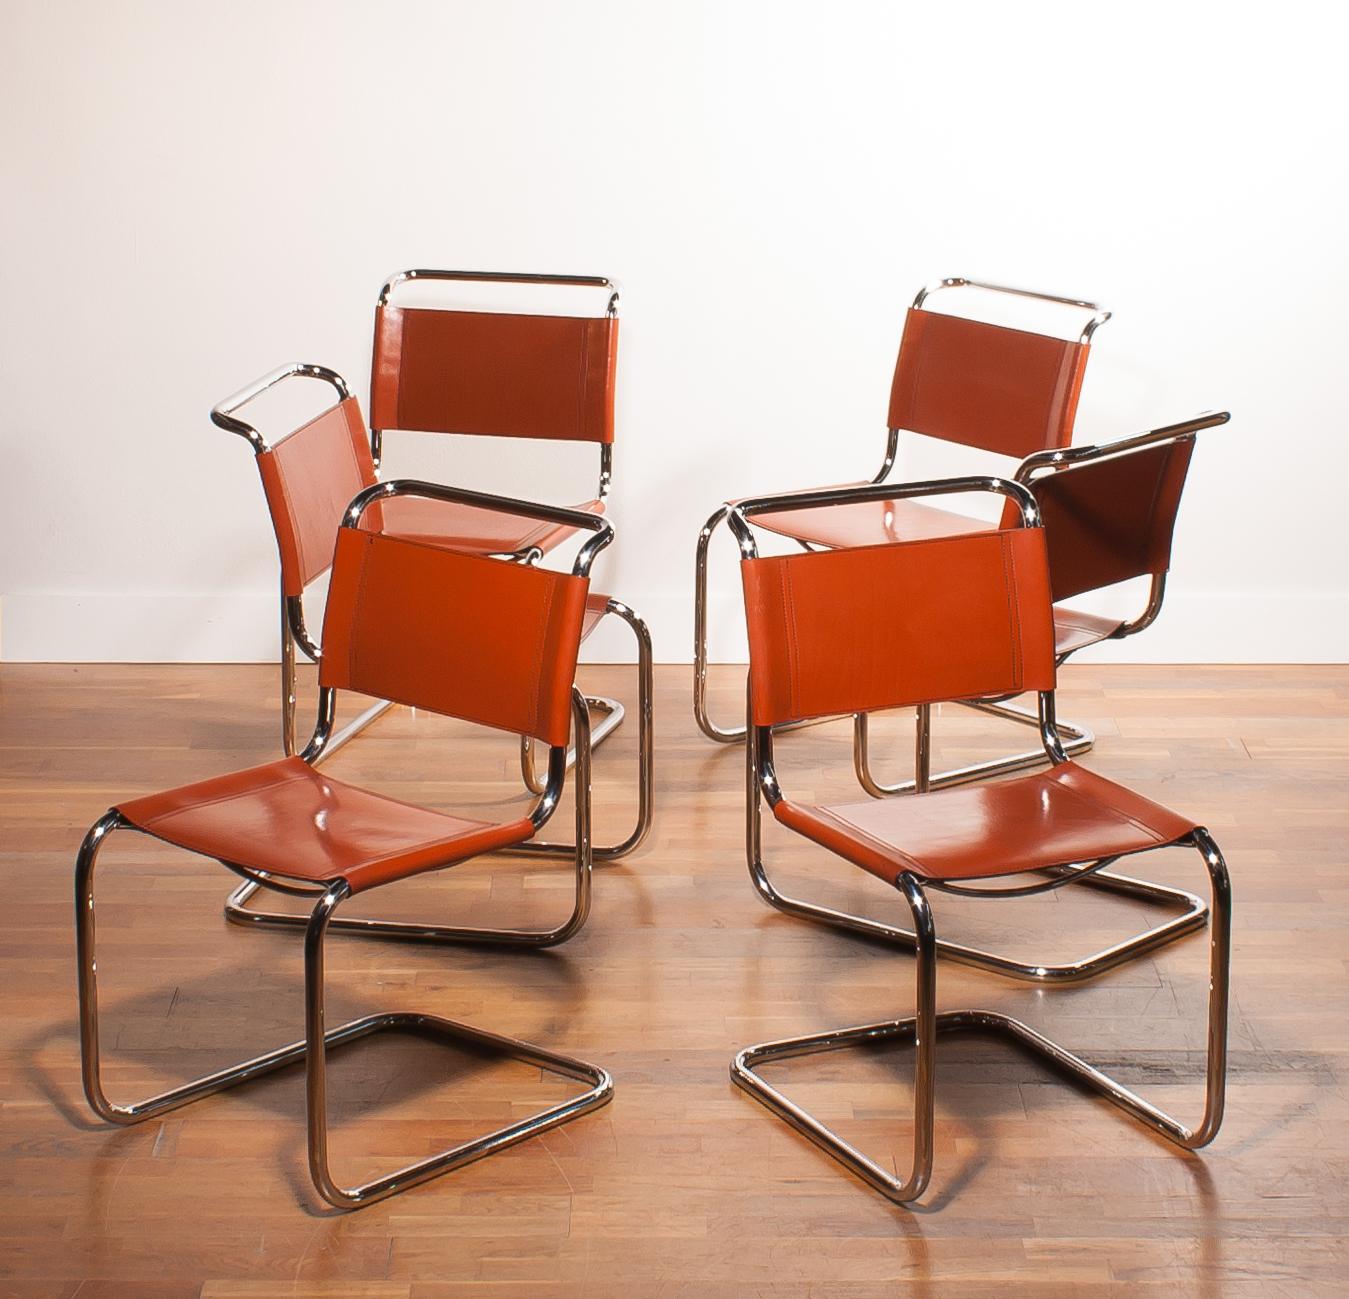 A beautiful set of six dining chairs designed by Mart Stam for Fasem.
These chairs have a cantilevered tubular metal frame with cognac saddle leather seating and backrest.
They are in a wonderful condition.
The chairs are marked with 'Fasem